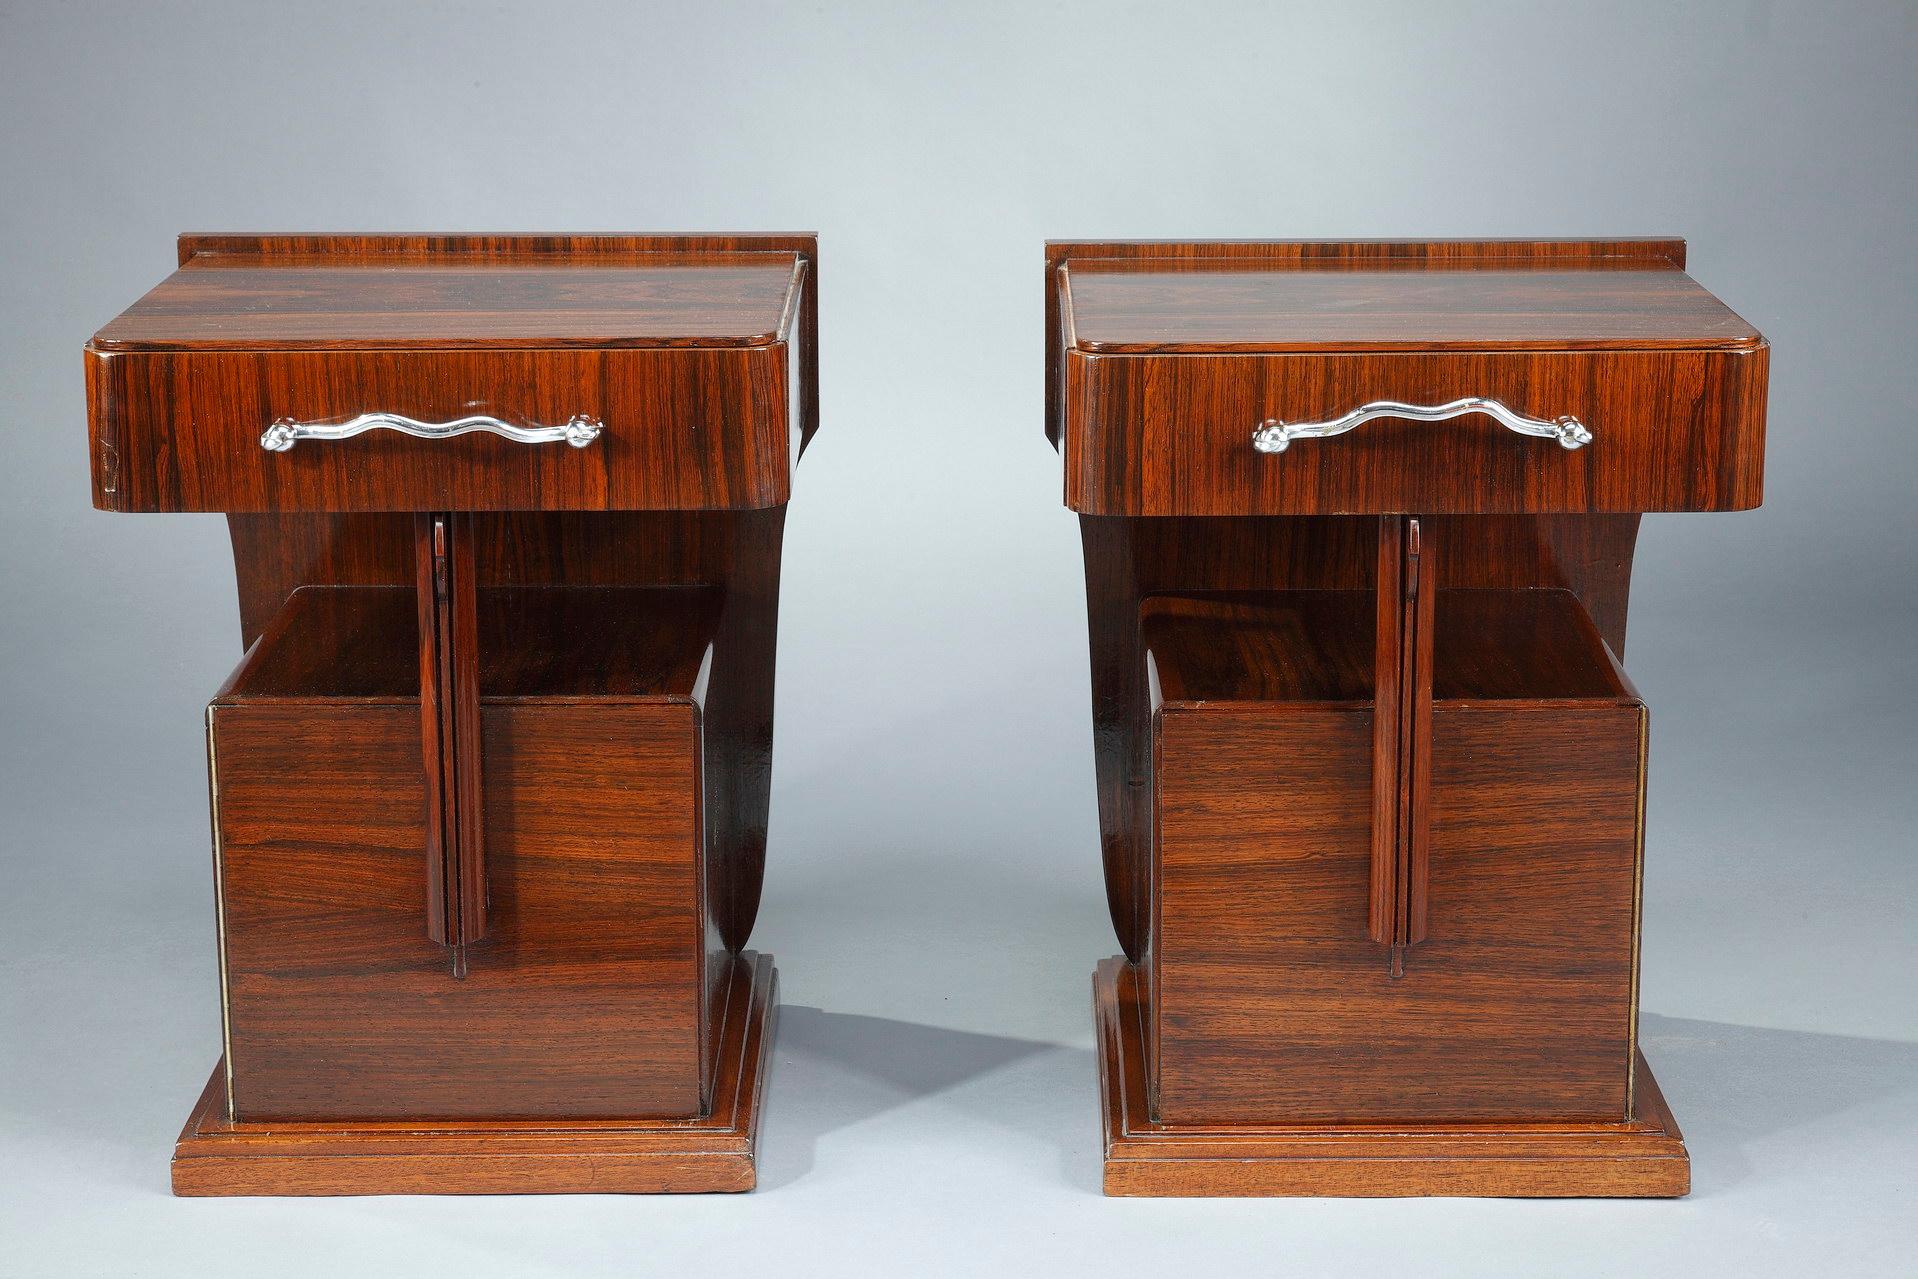 Pair of Art Deco bedside tables in Macassar ebony veneer, by the decorator Claude de Plasse. Each bedside table has a drawer opening with a chrome metal handle, and a small square cupboard. 

The Macassar ebony is a wood alternating black and